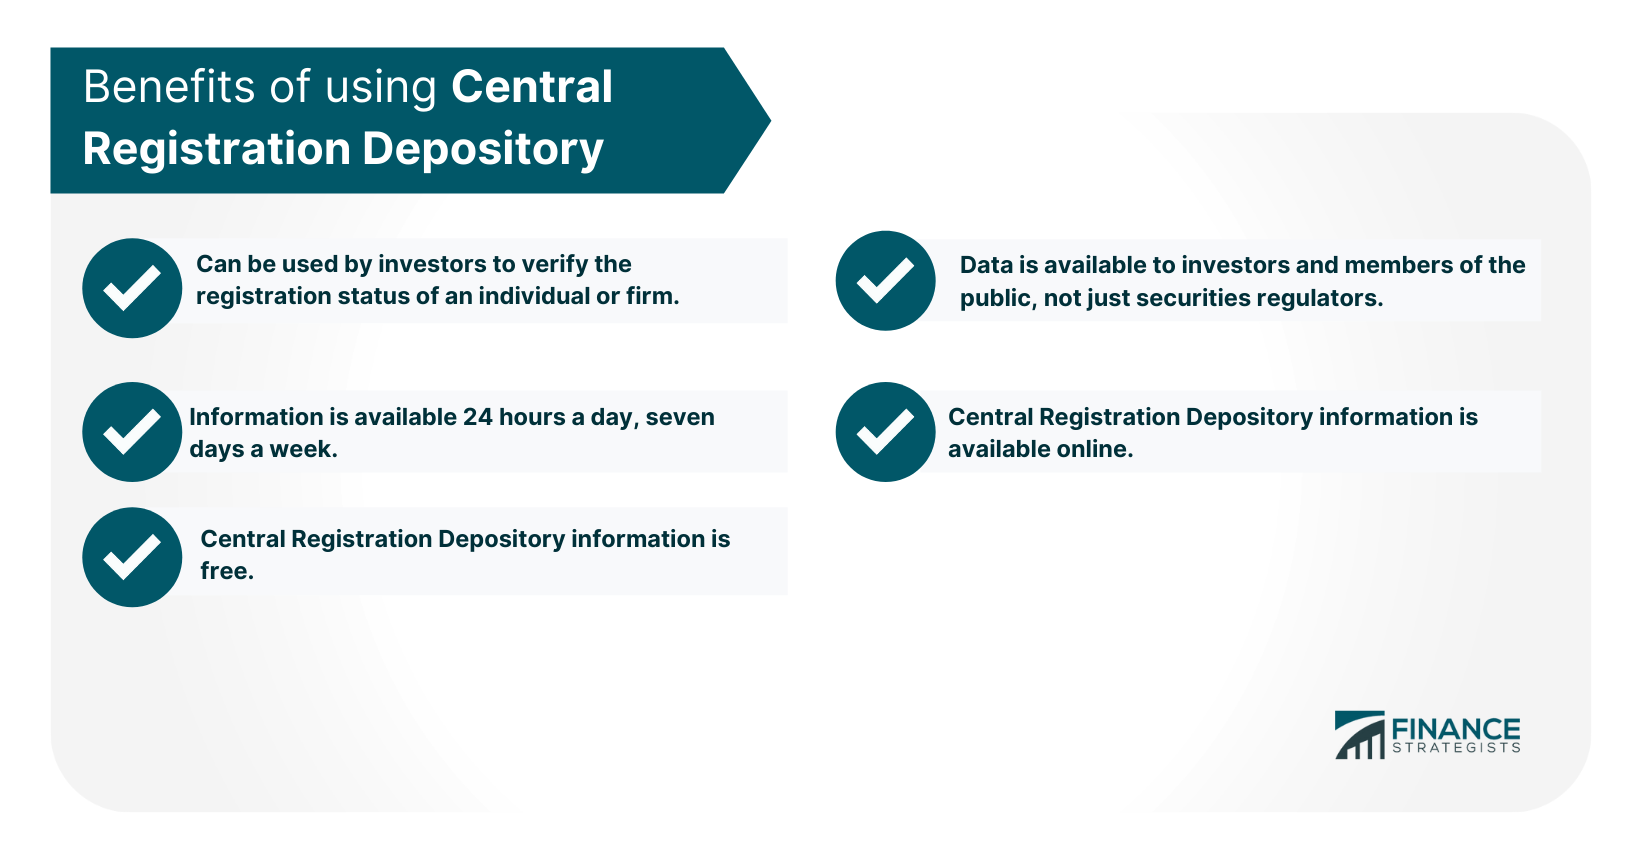 Benefits of using Central Registration Depository